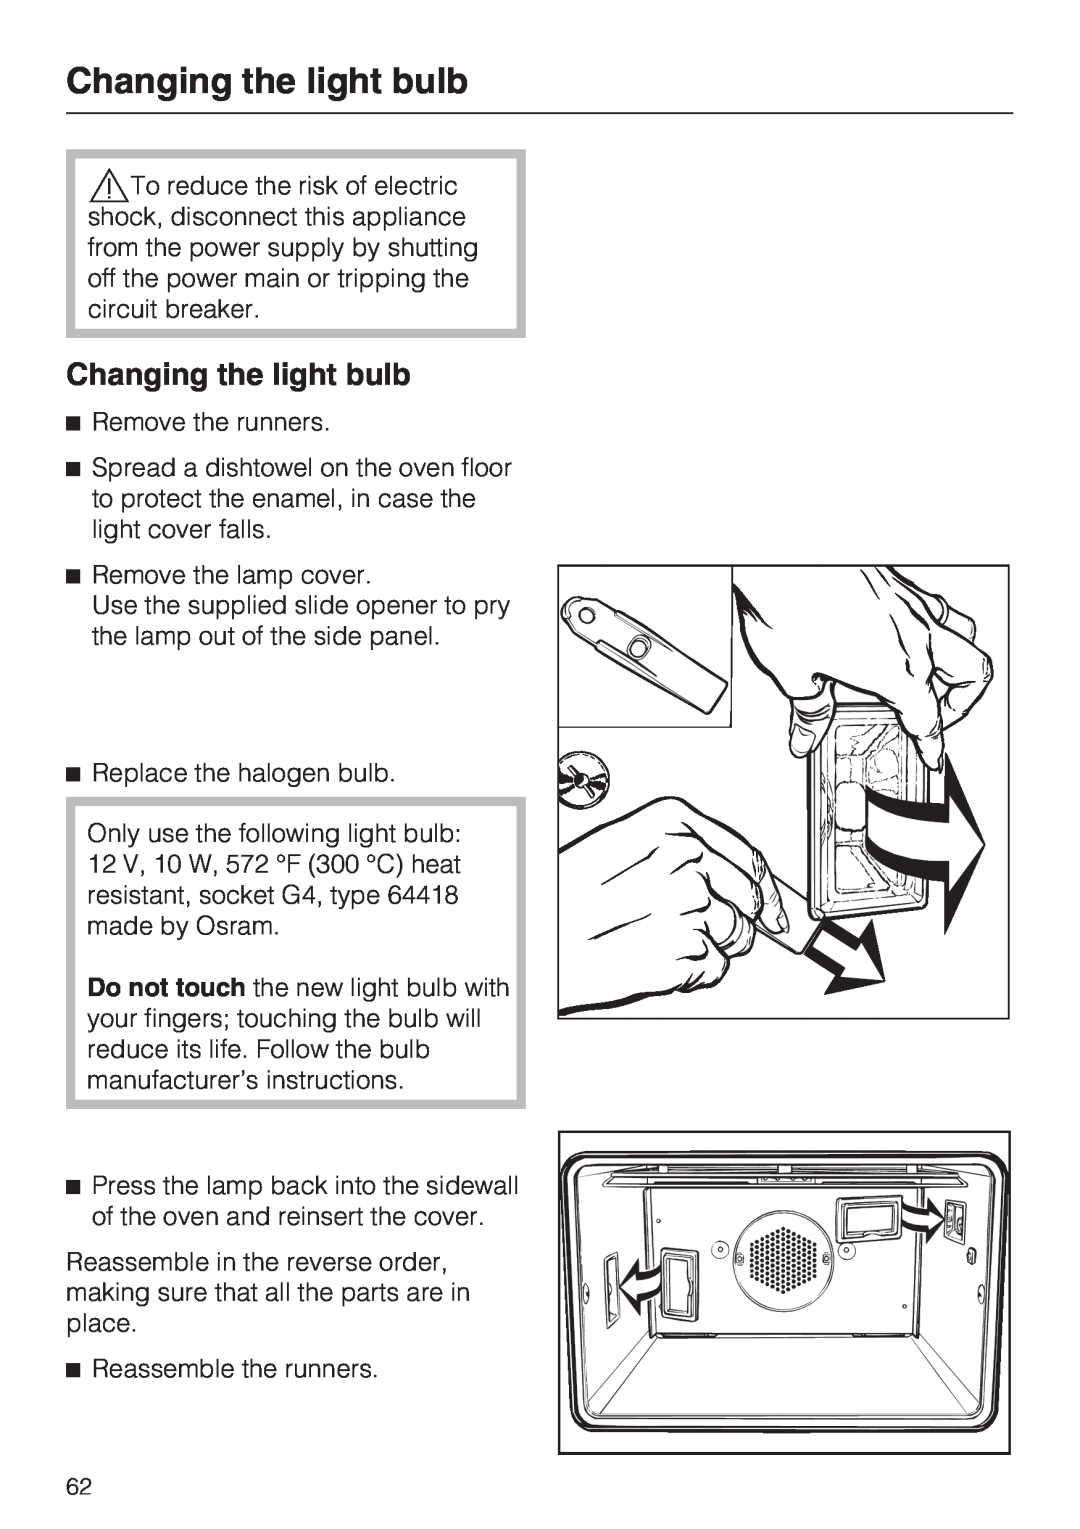 Miele H 4784 BP, H 4786 BP installation instructions Changing the light bulb 